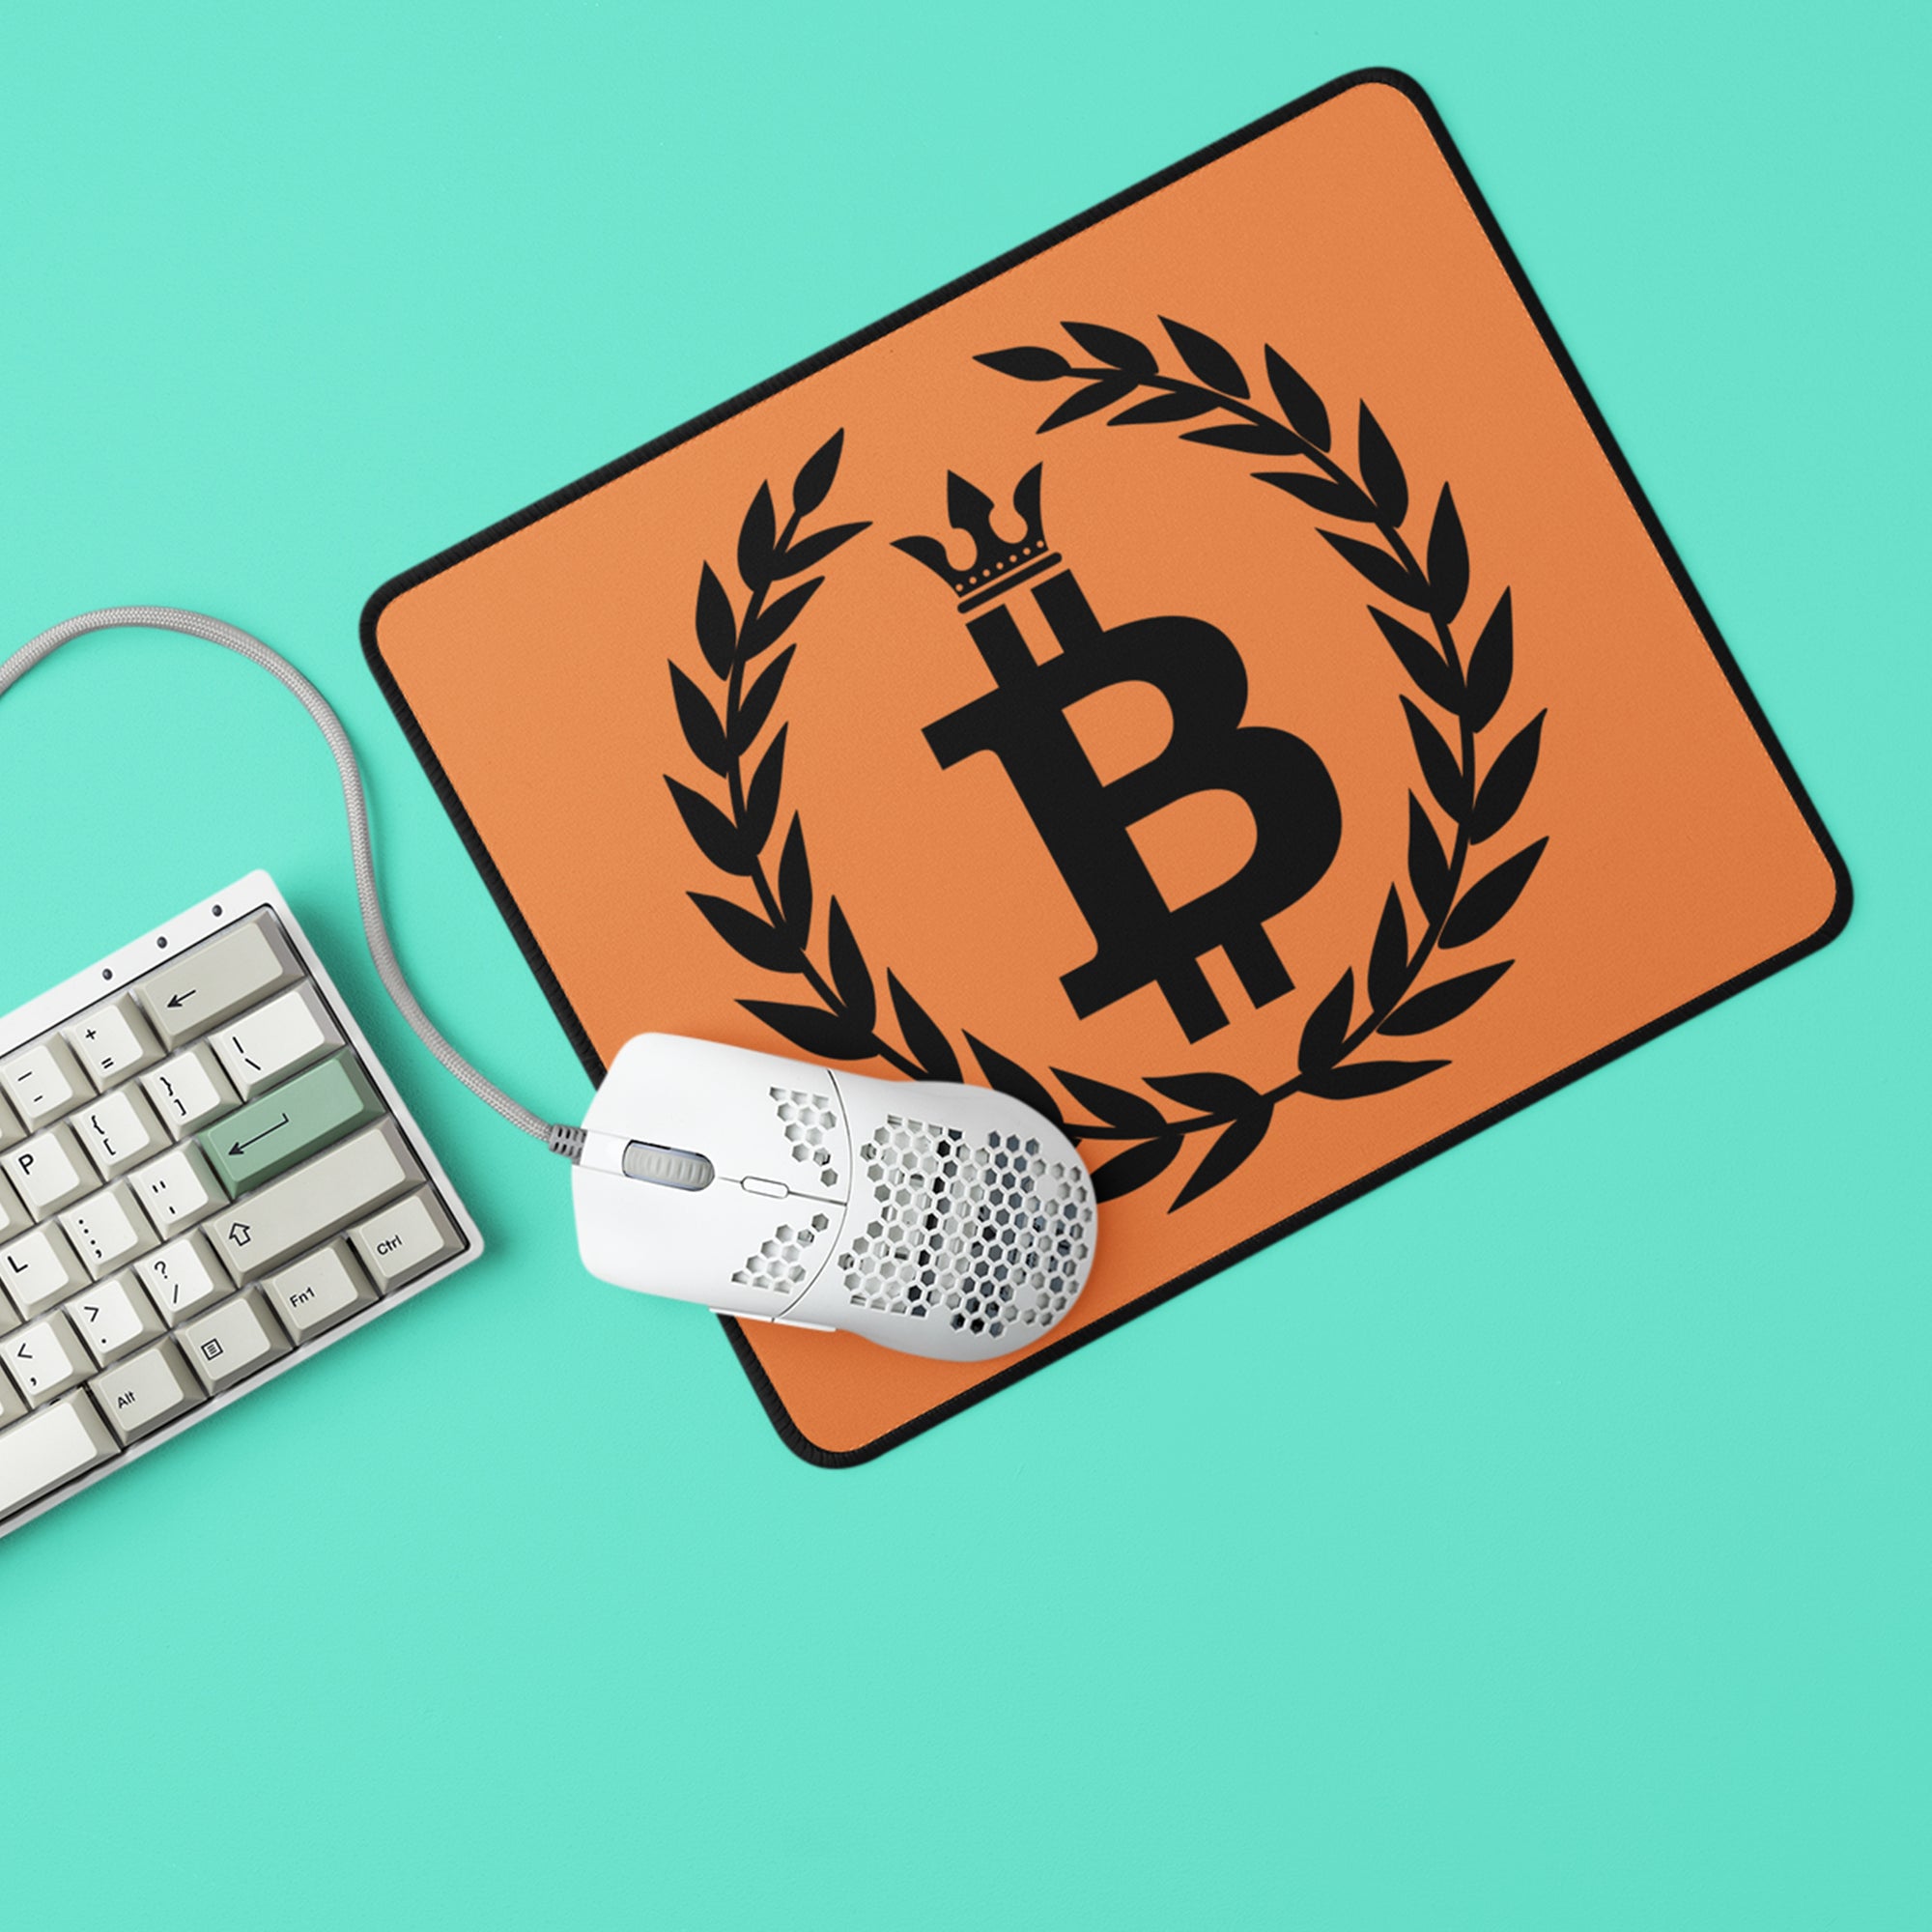 Bitcoin Accessories - Bitcoin Dominance Mouse Pad displayed with keyboard and mouse.